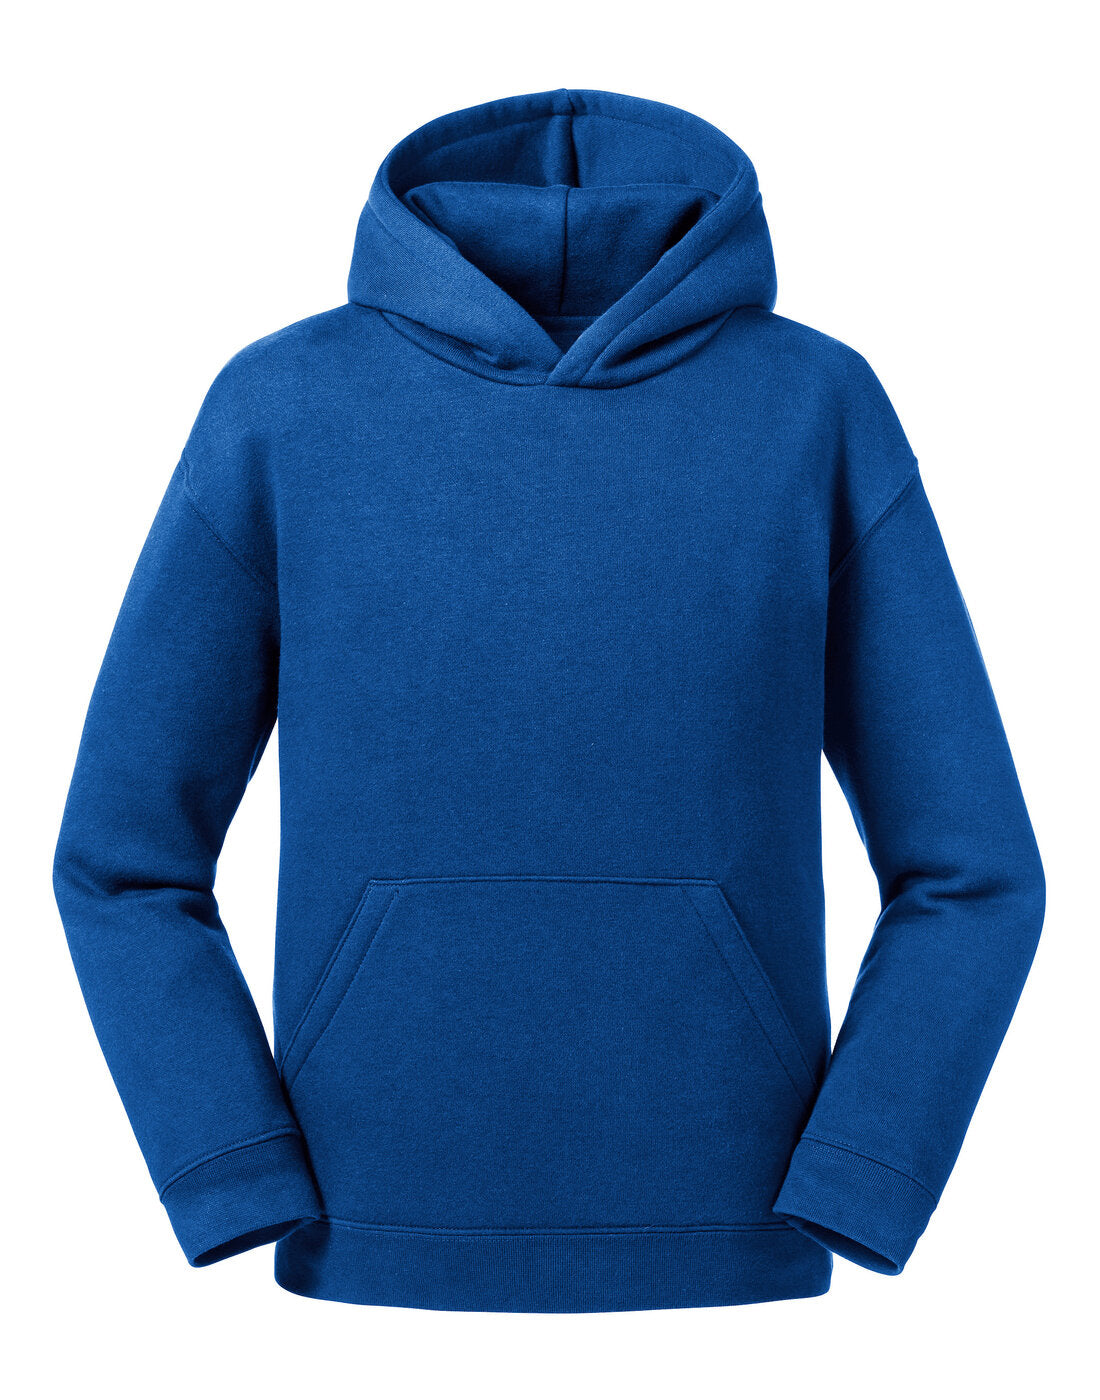 Russell Kids Authentic Hoodie Bright Royal